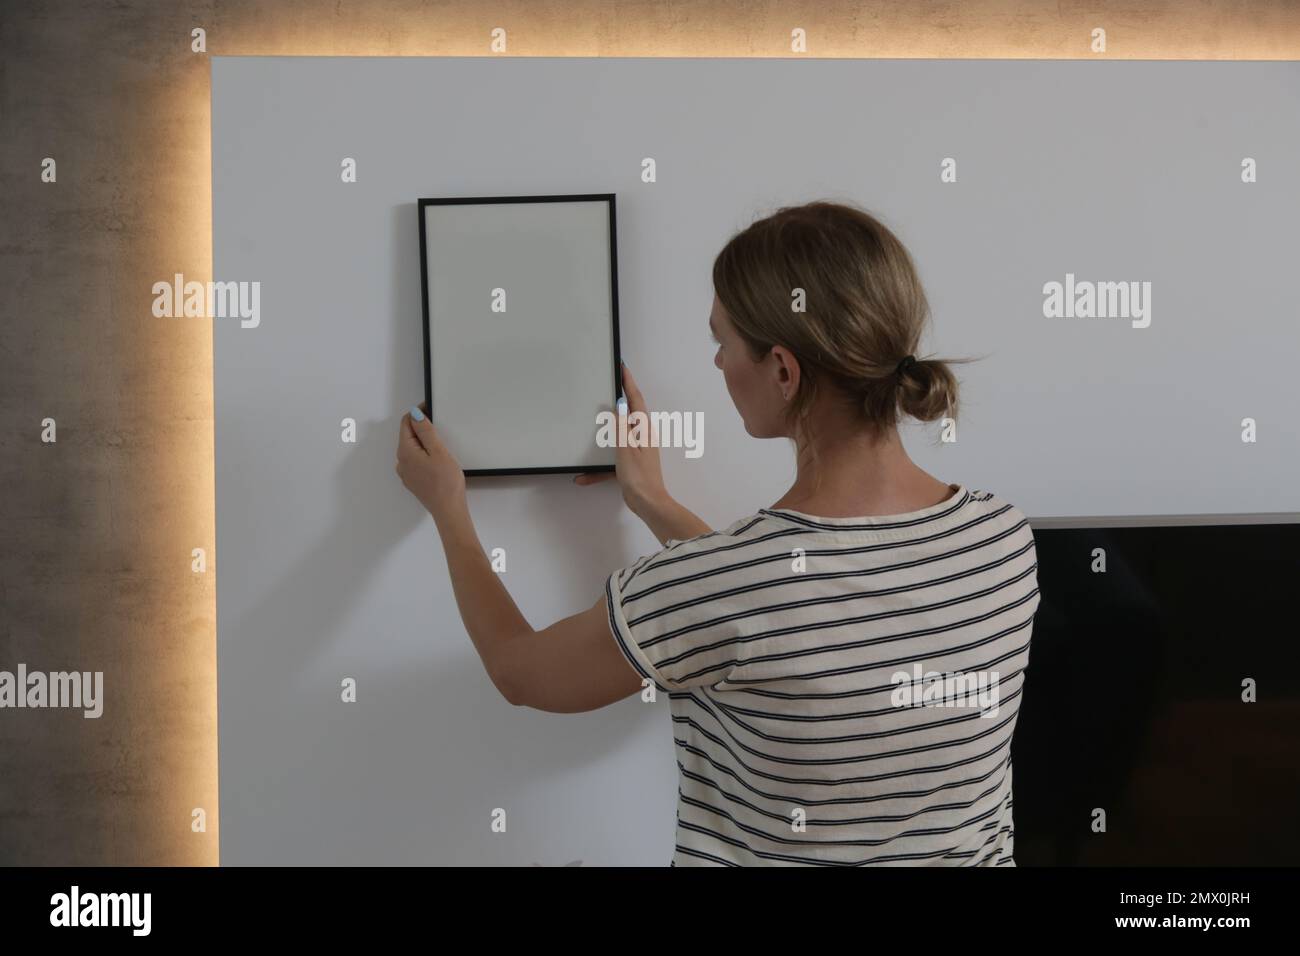 Woman arranging picture frames on wall in new house, diy home improvement concept Stock Photo